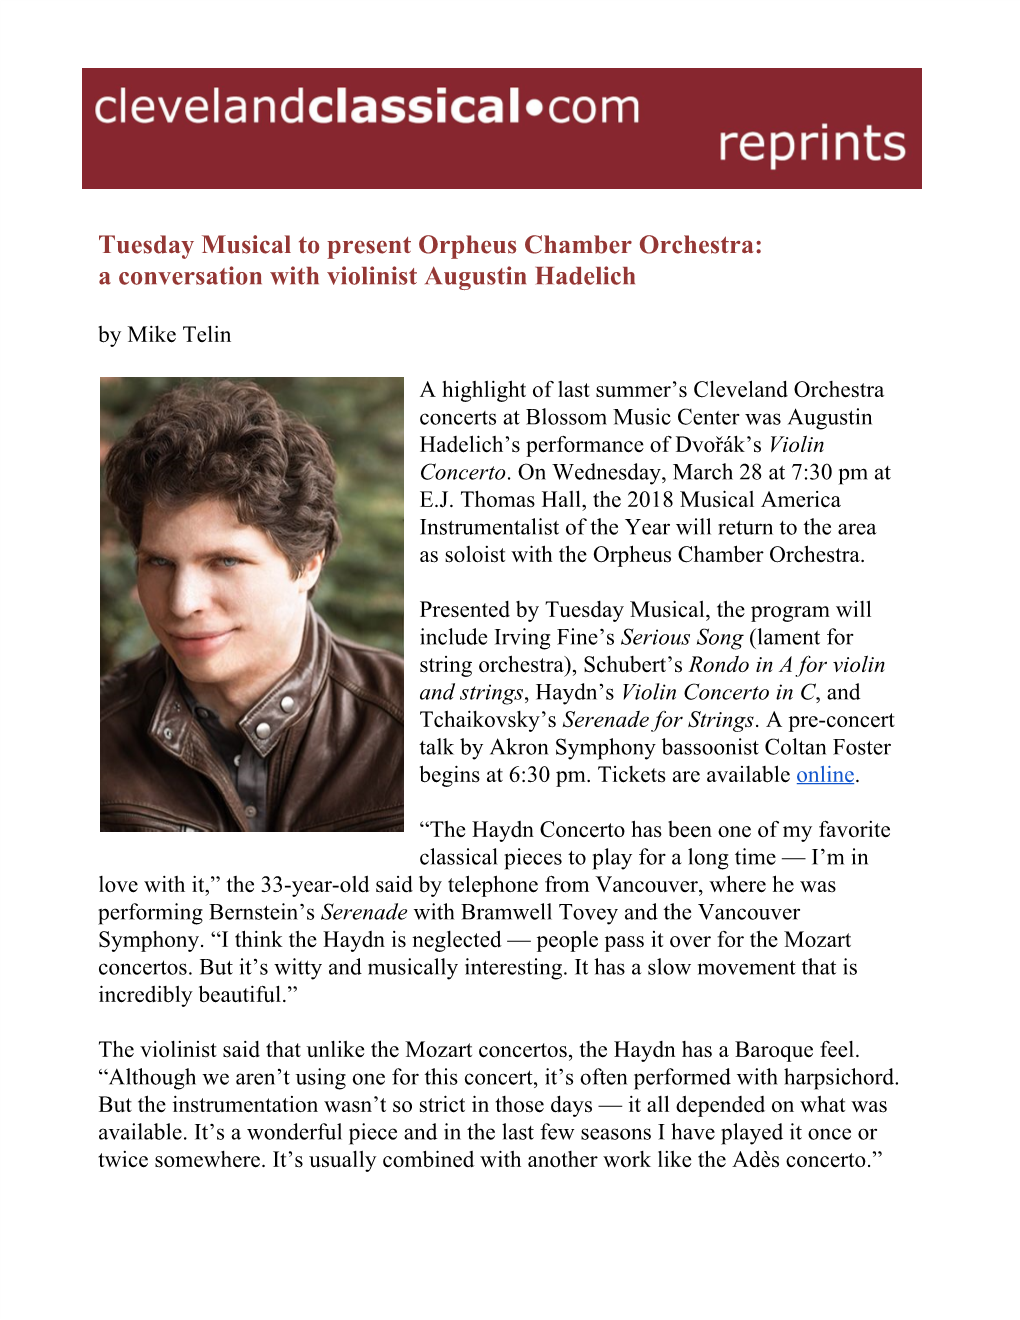 Tuesday Musical to Present Orpheus Chamber Orchestra: a Conversation with Violinist Augustin Hadelich by Mike Telin